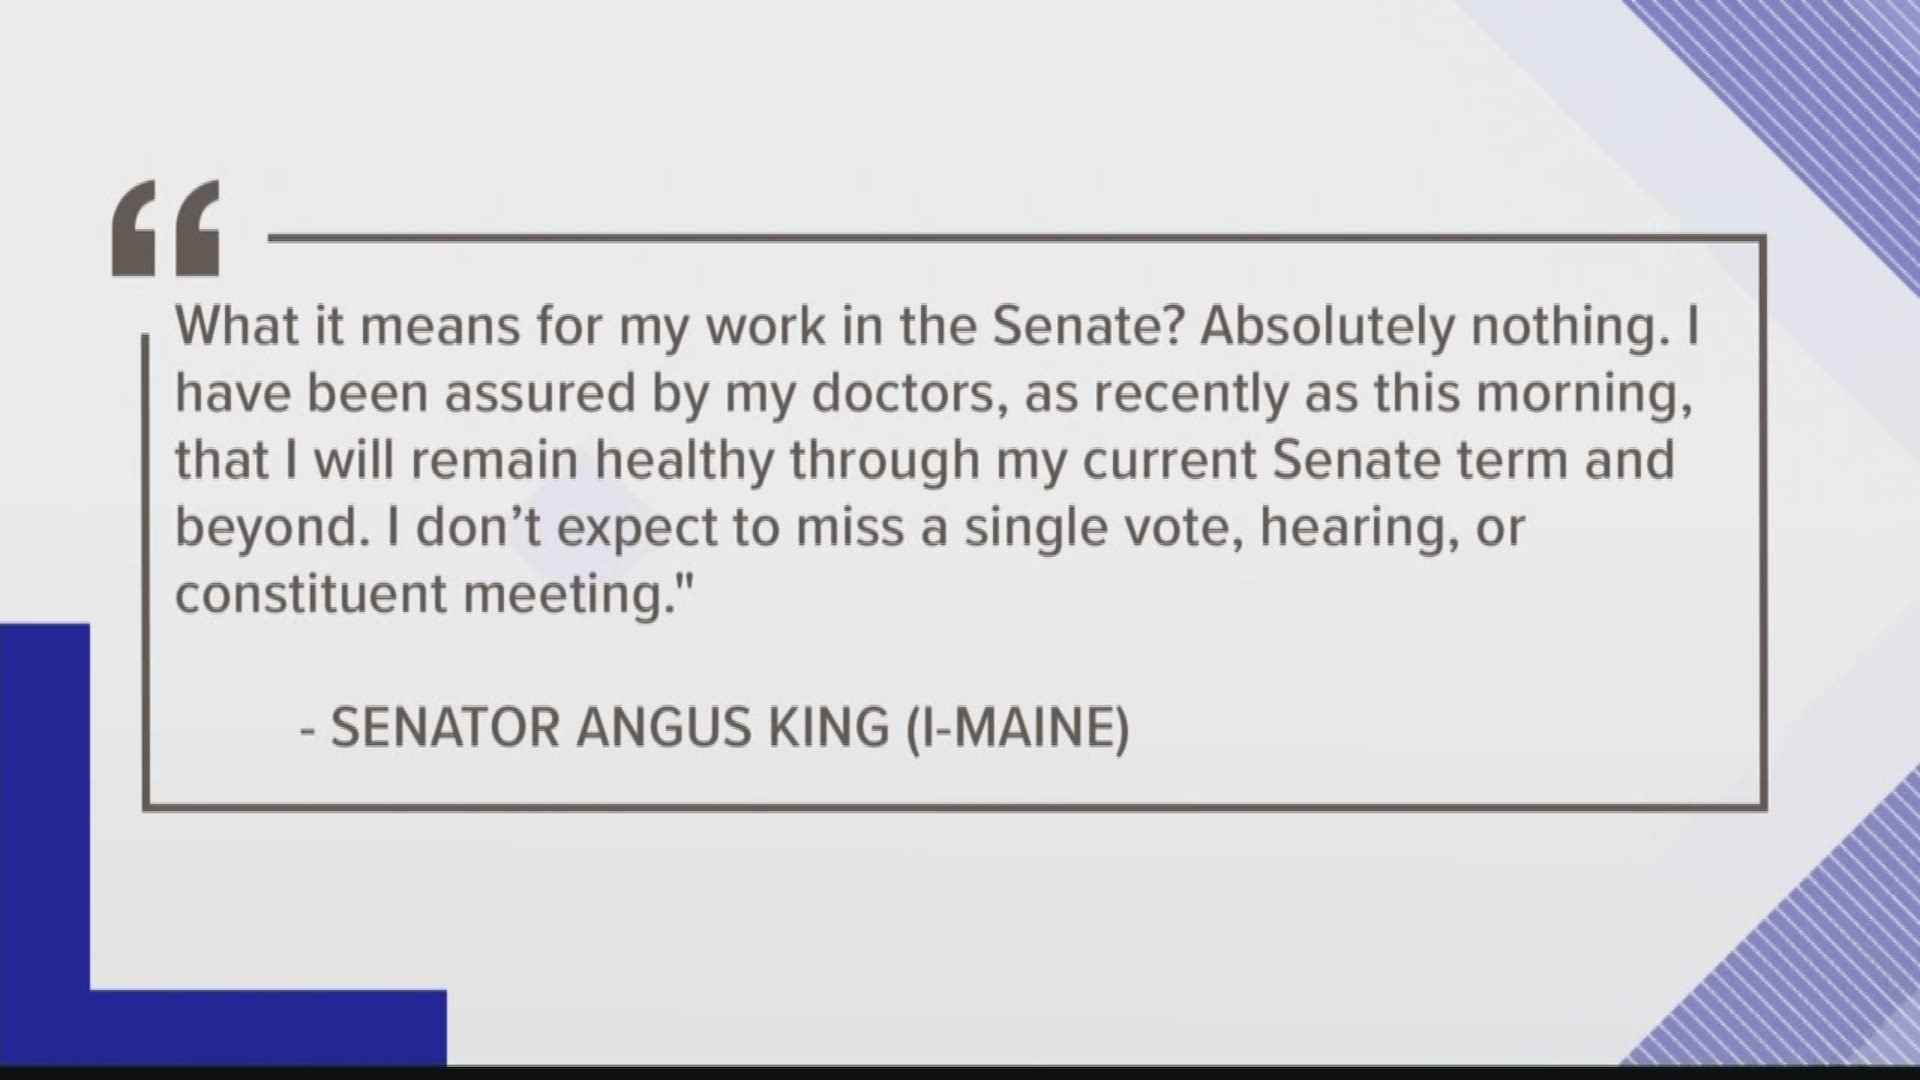 Senator Angus King is undergoing follow-up radiation treatments for prostate cancer.